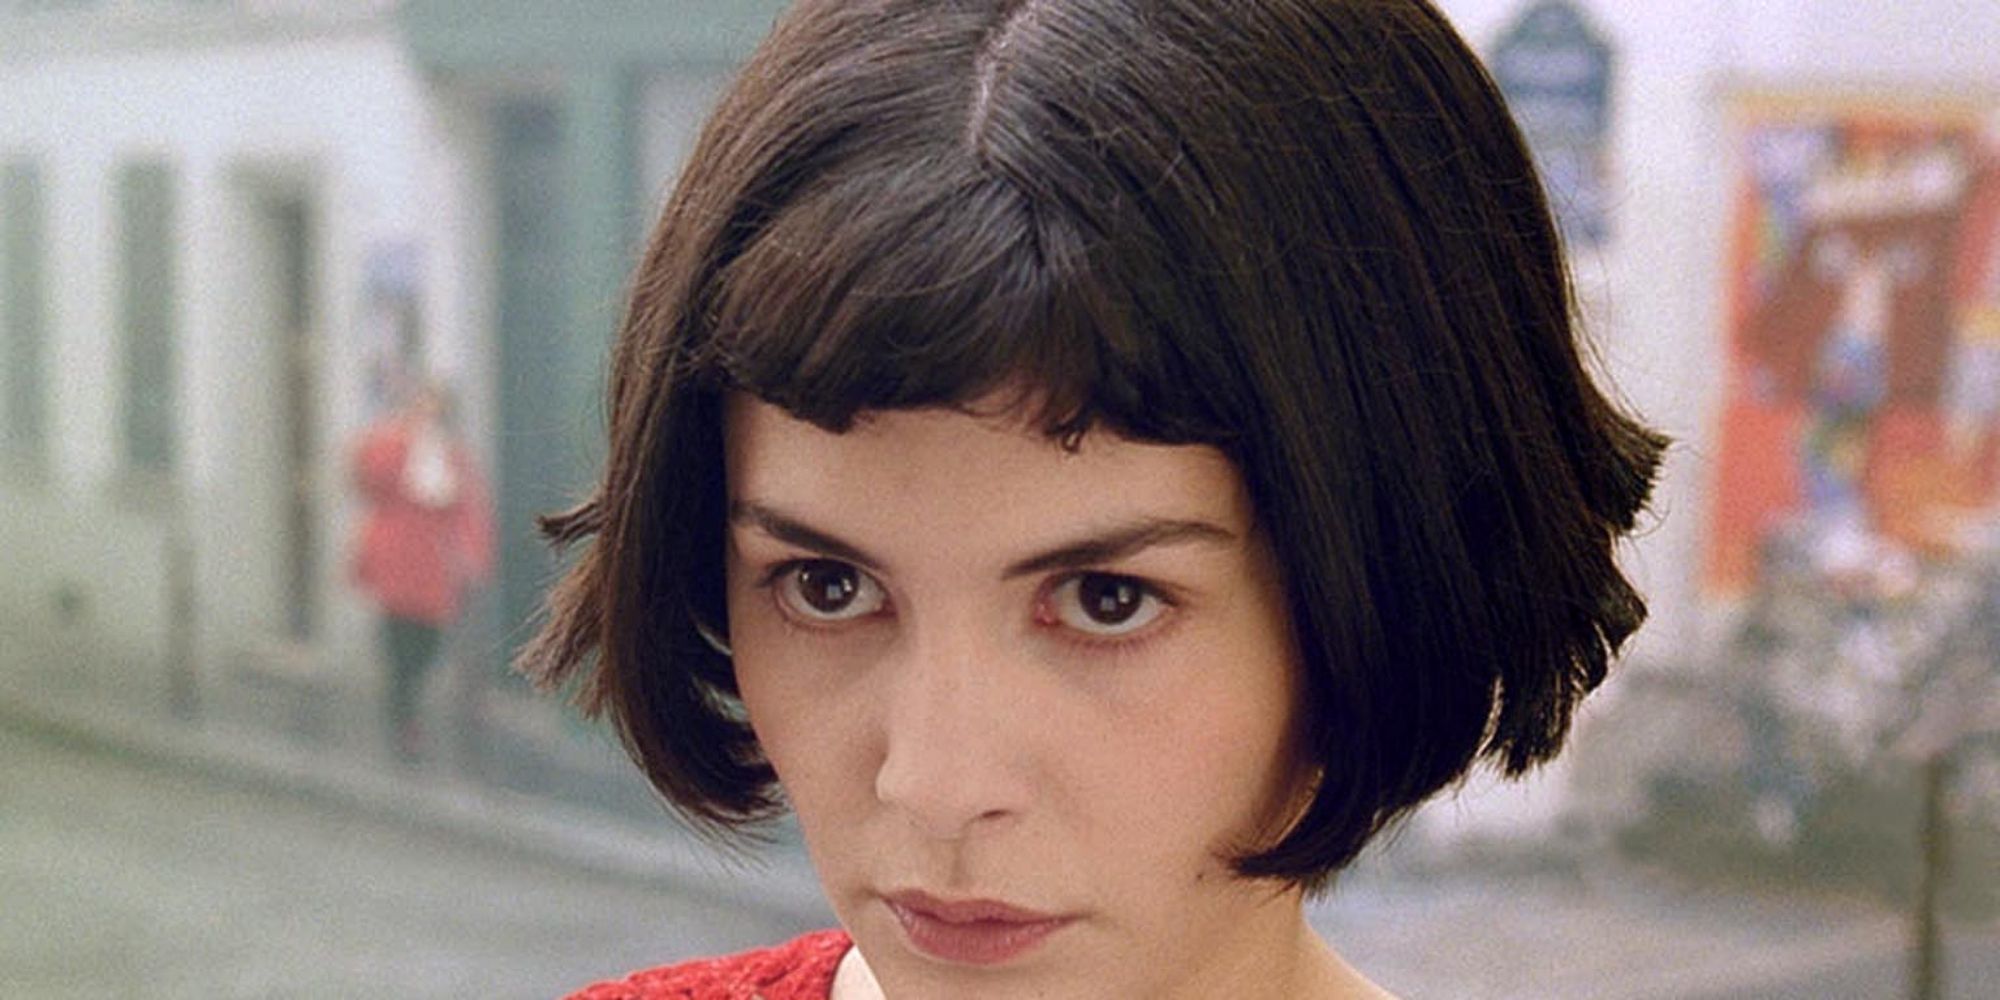 An image from the movie Amelie (2001)